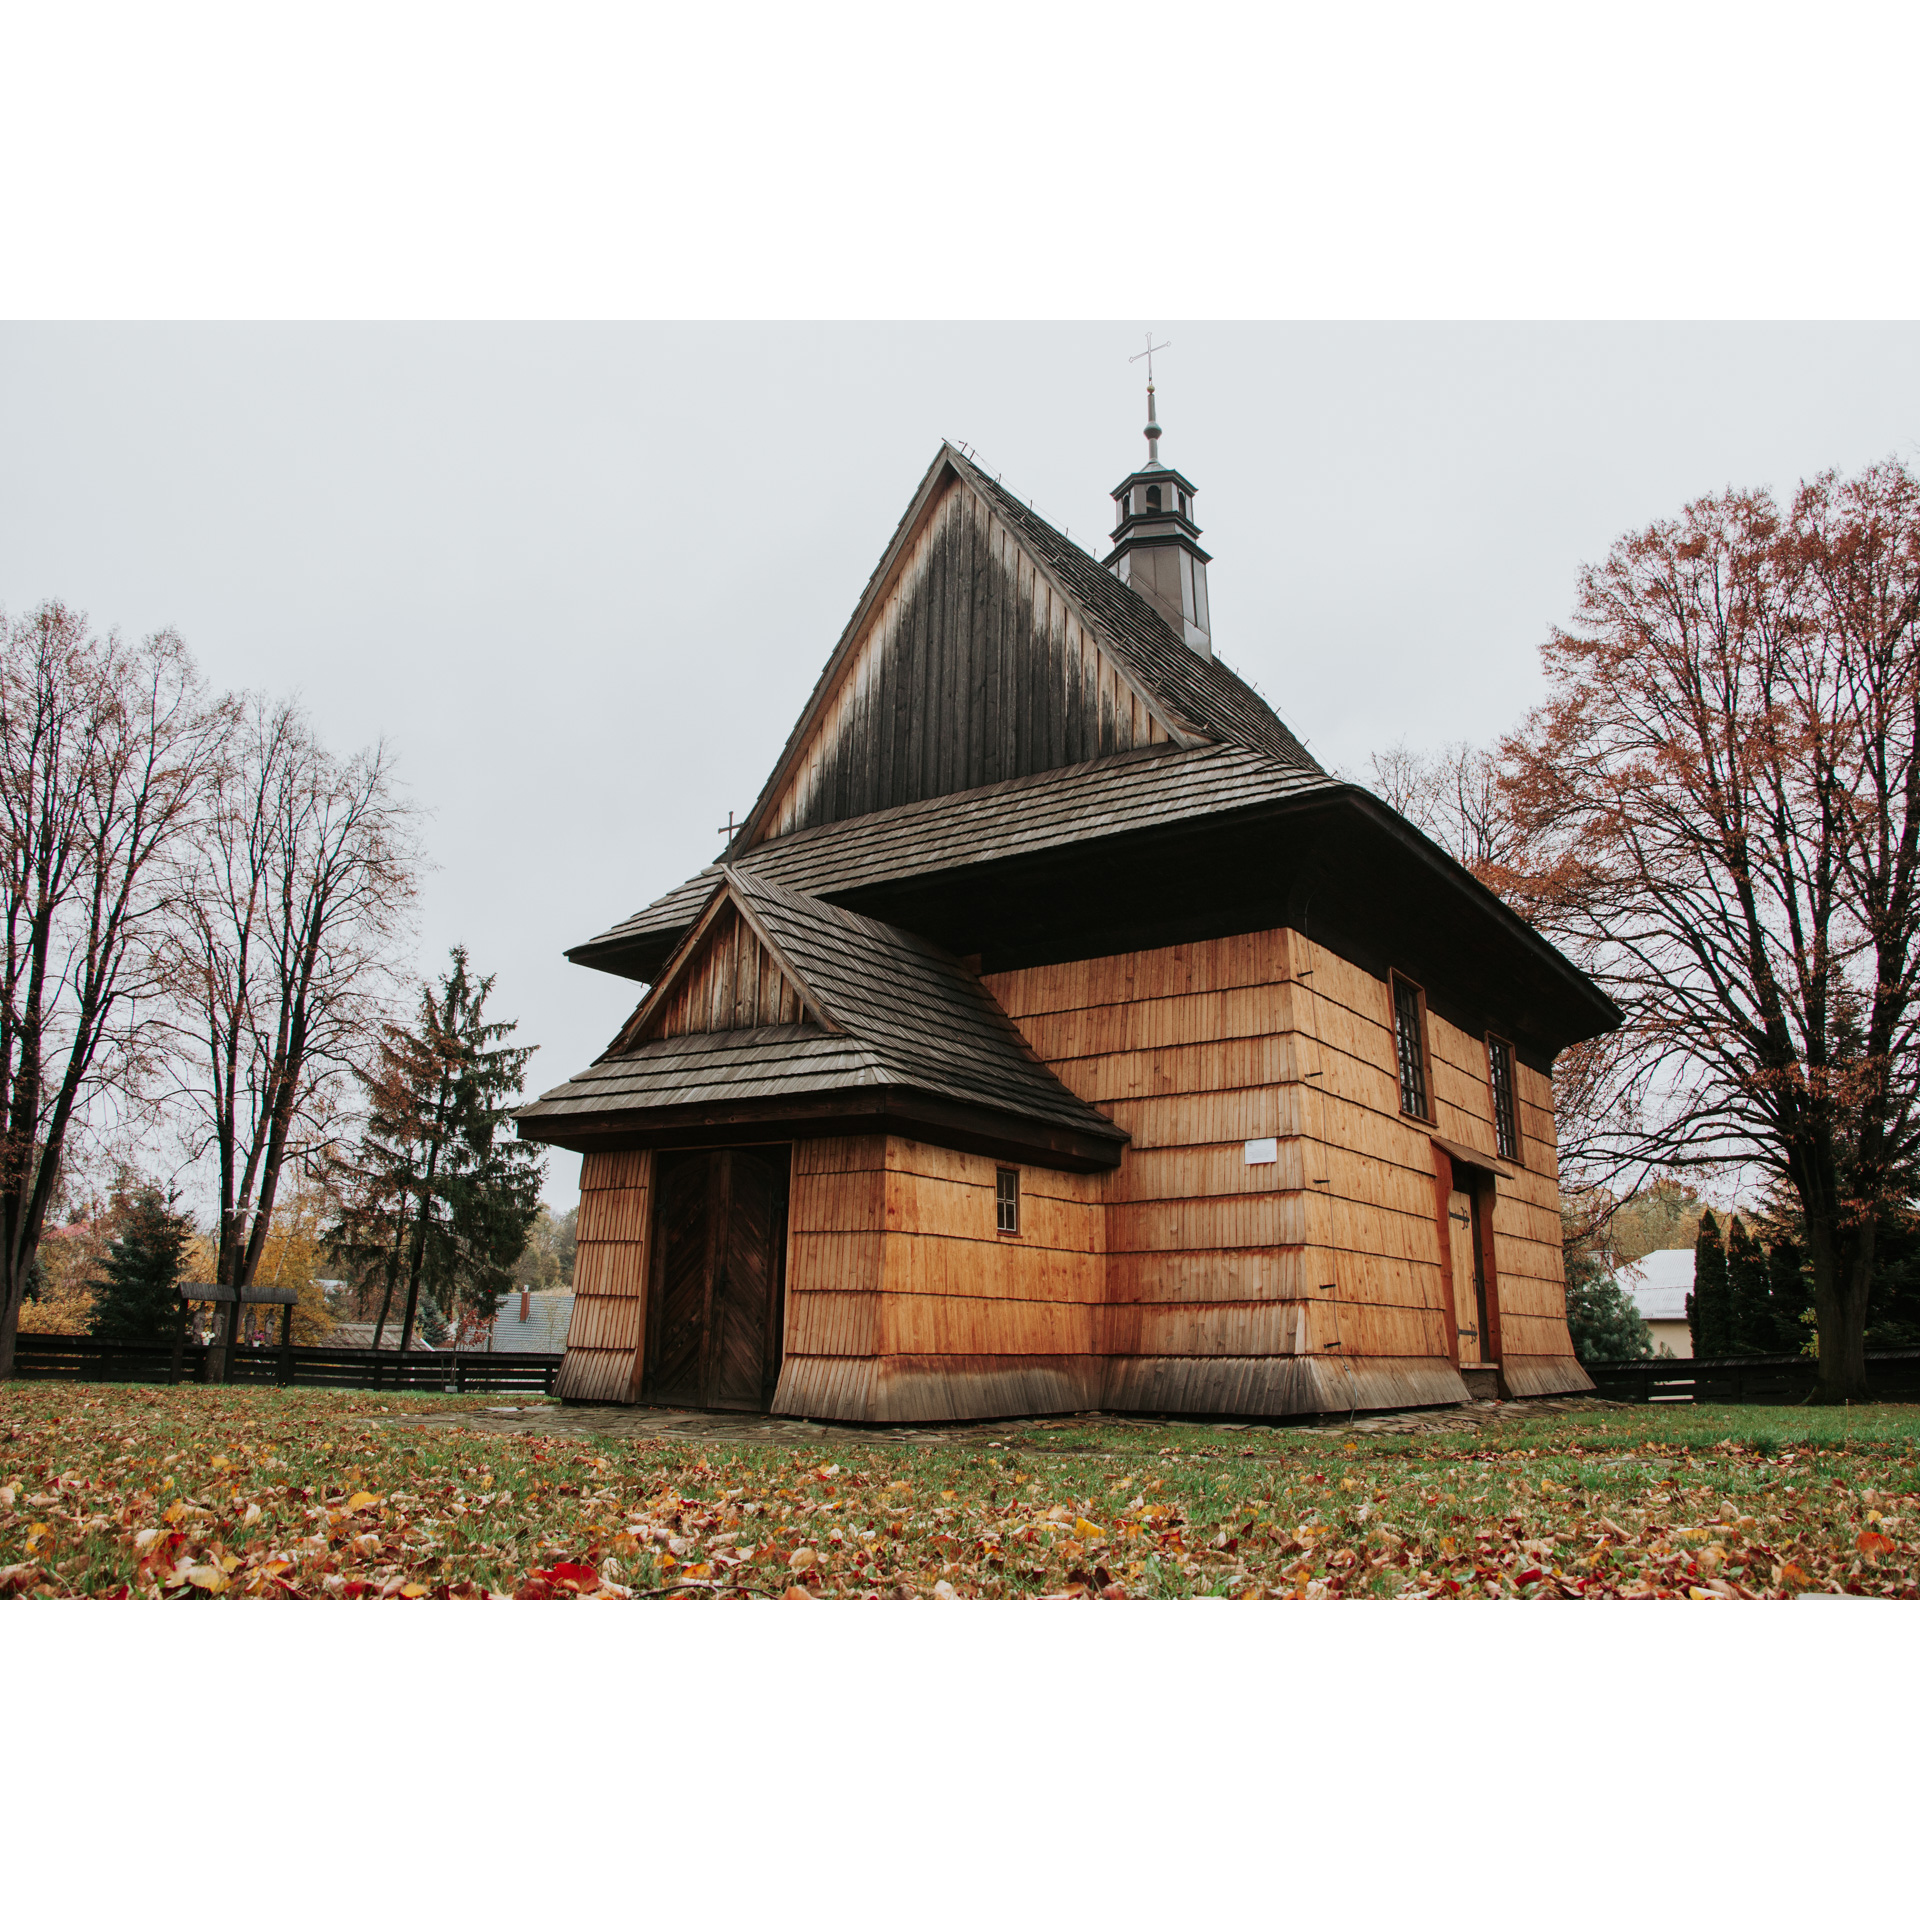 A wooden historic church made of light wood and with a black triangular roof, a turret and a cross on top